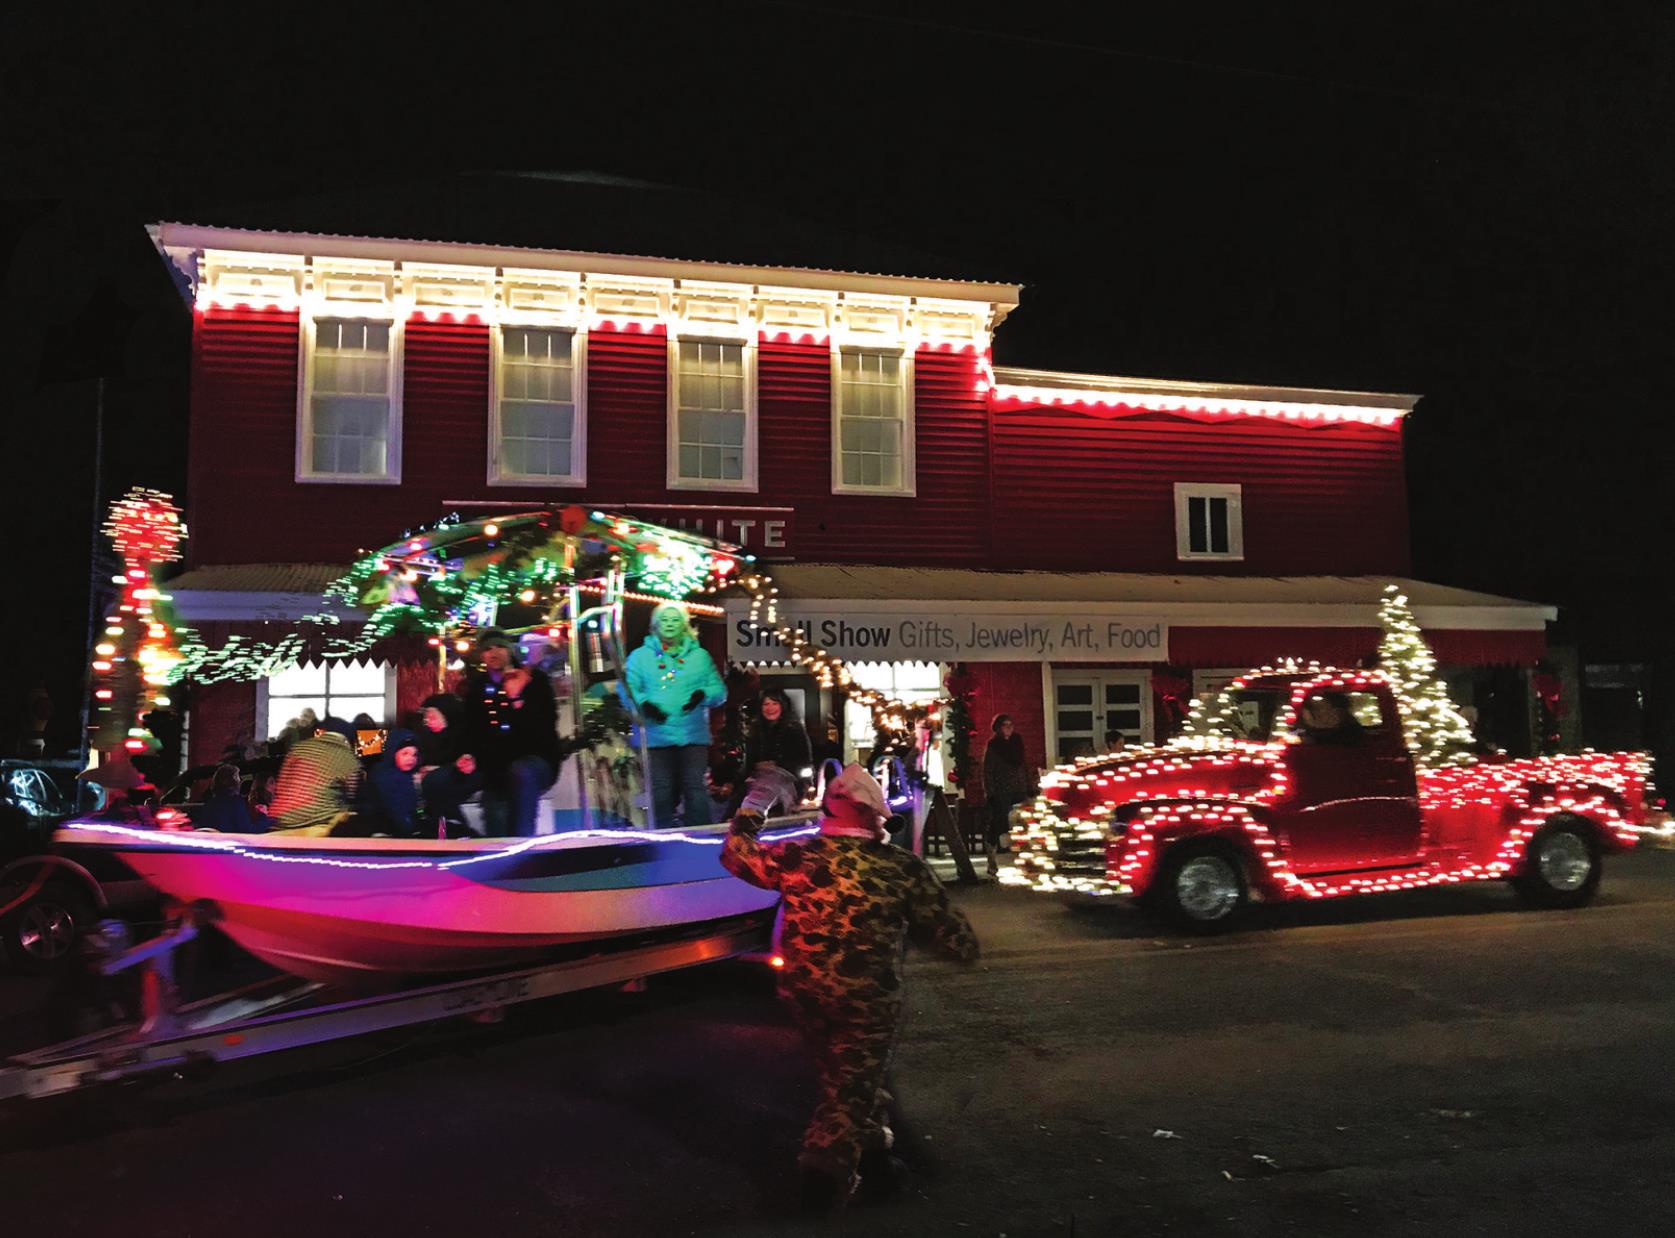 Plan Now for Fayetteville’s Festive Country Christmas Dec. 12 The